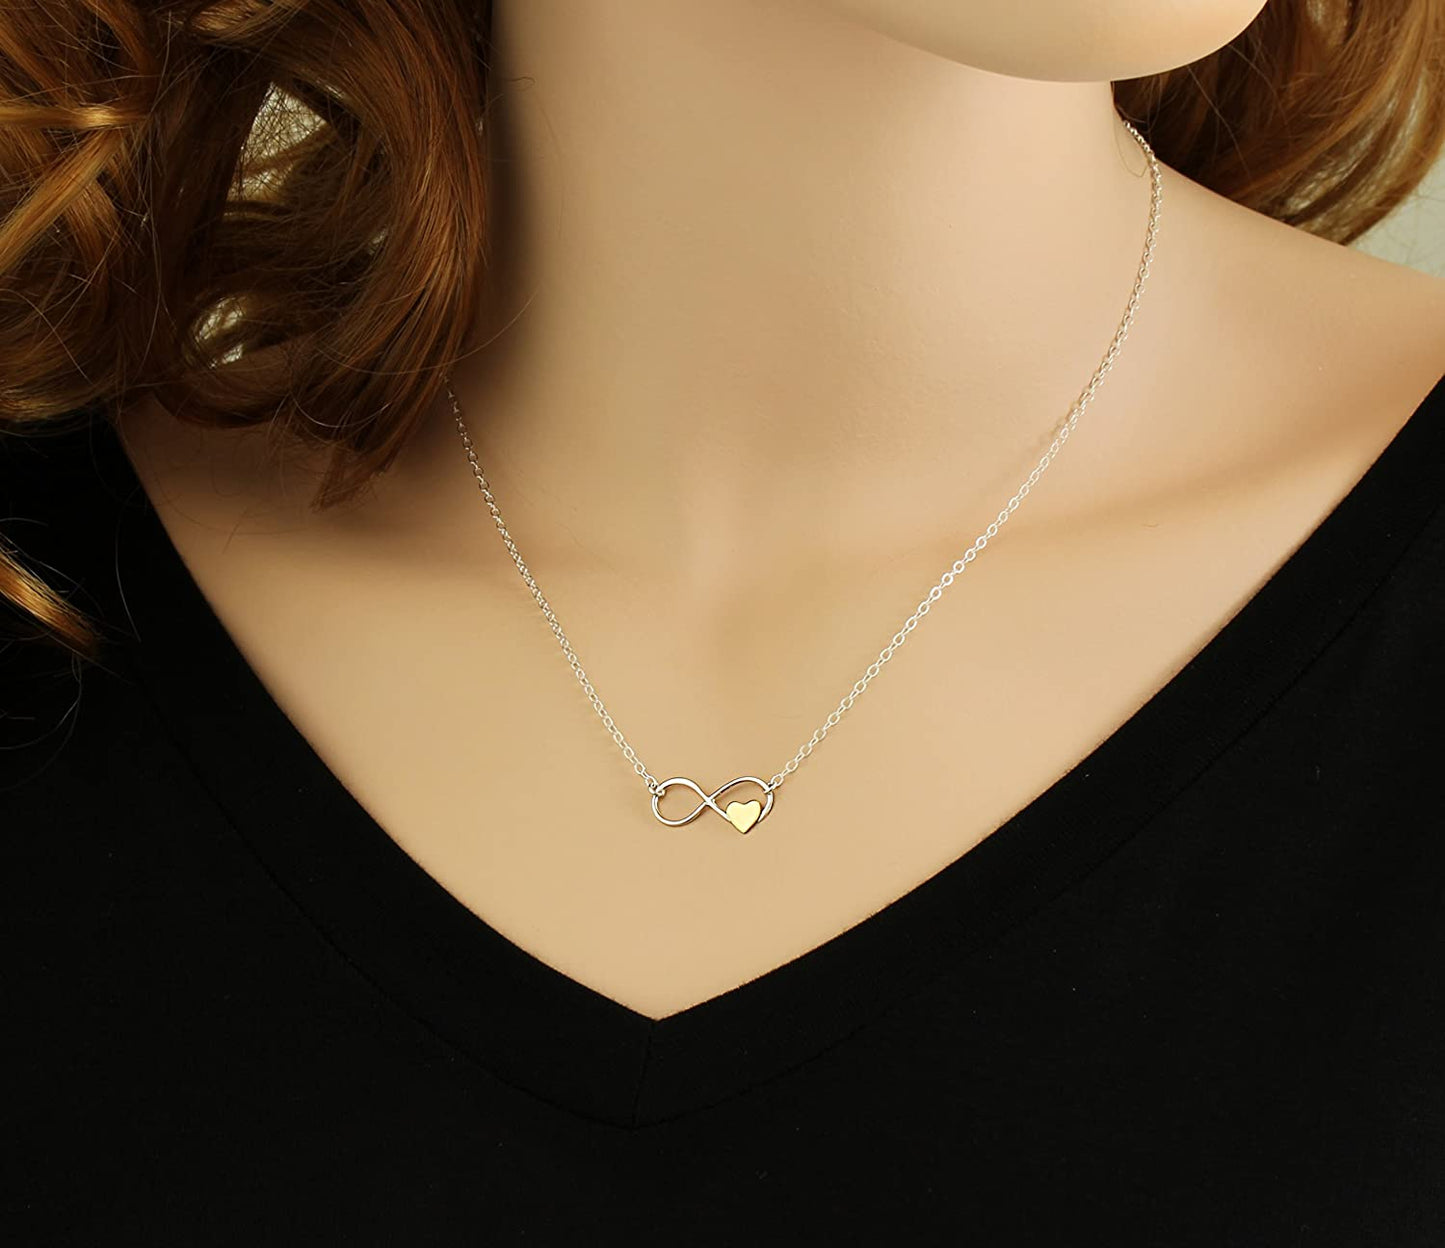 Unique Gift for Stepdaughter • Gifts from Mom Dad • Infinite Love • Sterling Silver Necklace • Infinity Gold Heart Charm Necklace • New Daughter • Wedding Birthday Christmas Gifts for Women Girls